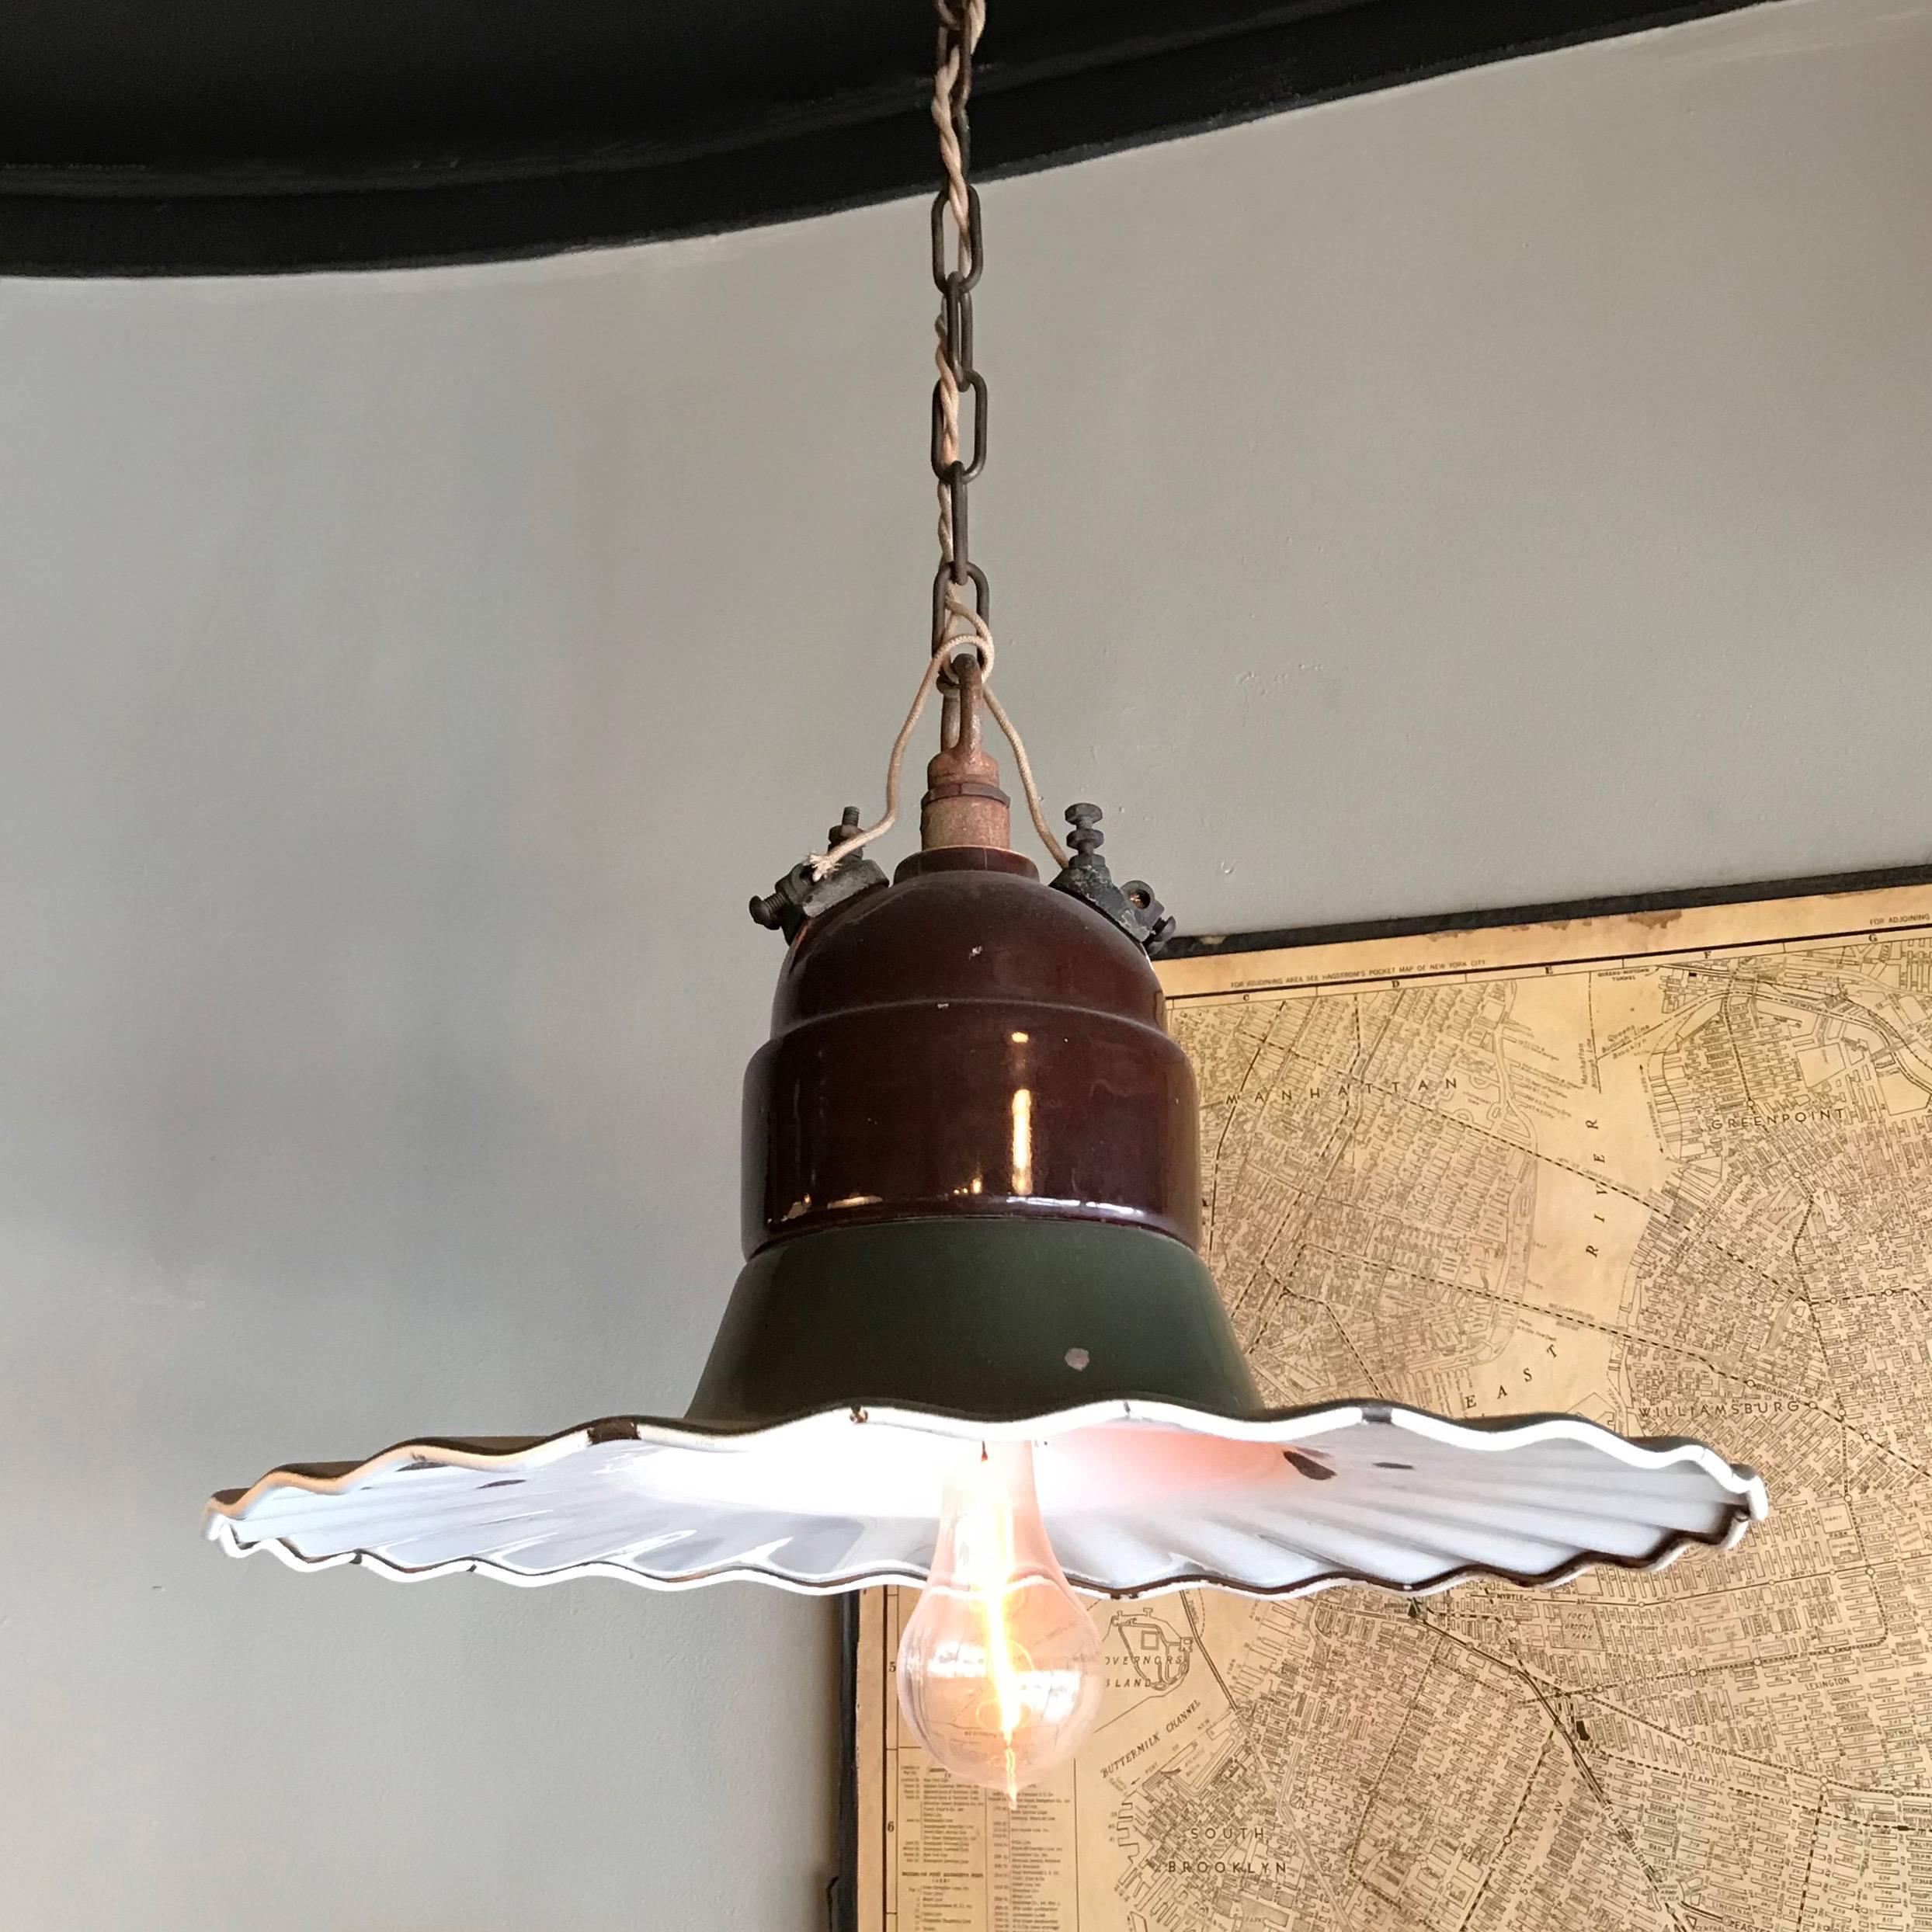 Large, industrial, gas station pendant light features a pie crust ruffle, green and white porcelain enameled shade with brown enameled fitter on 36 inches of chain. The lamp is newly wired to accept up to a 200 watt bulb. The hanging length is